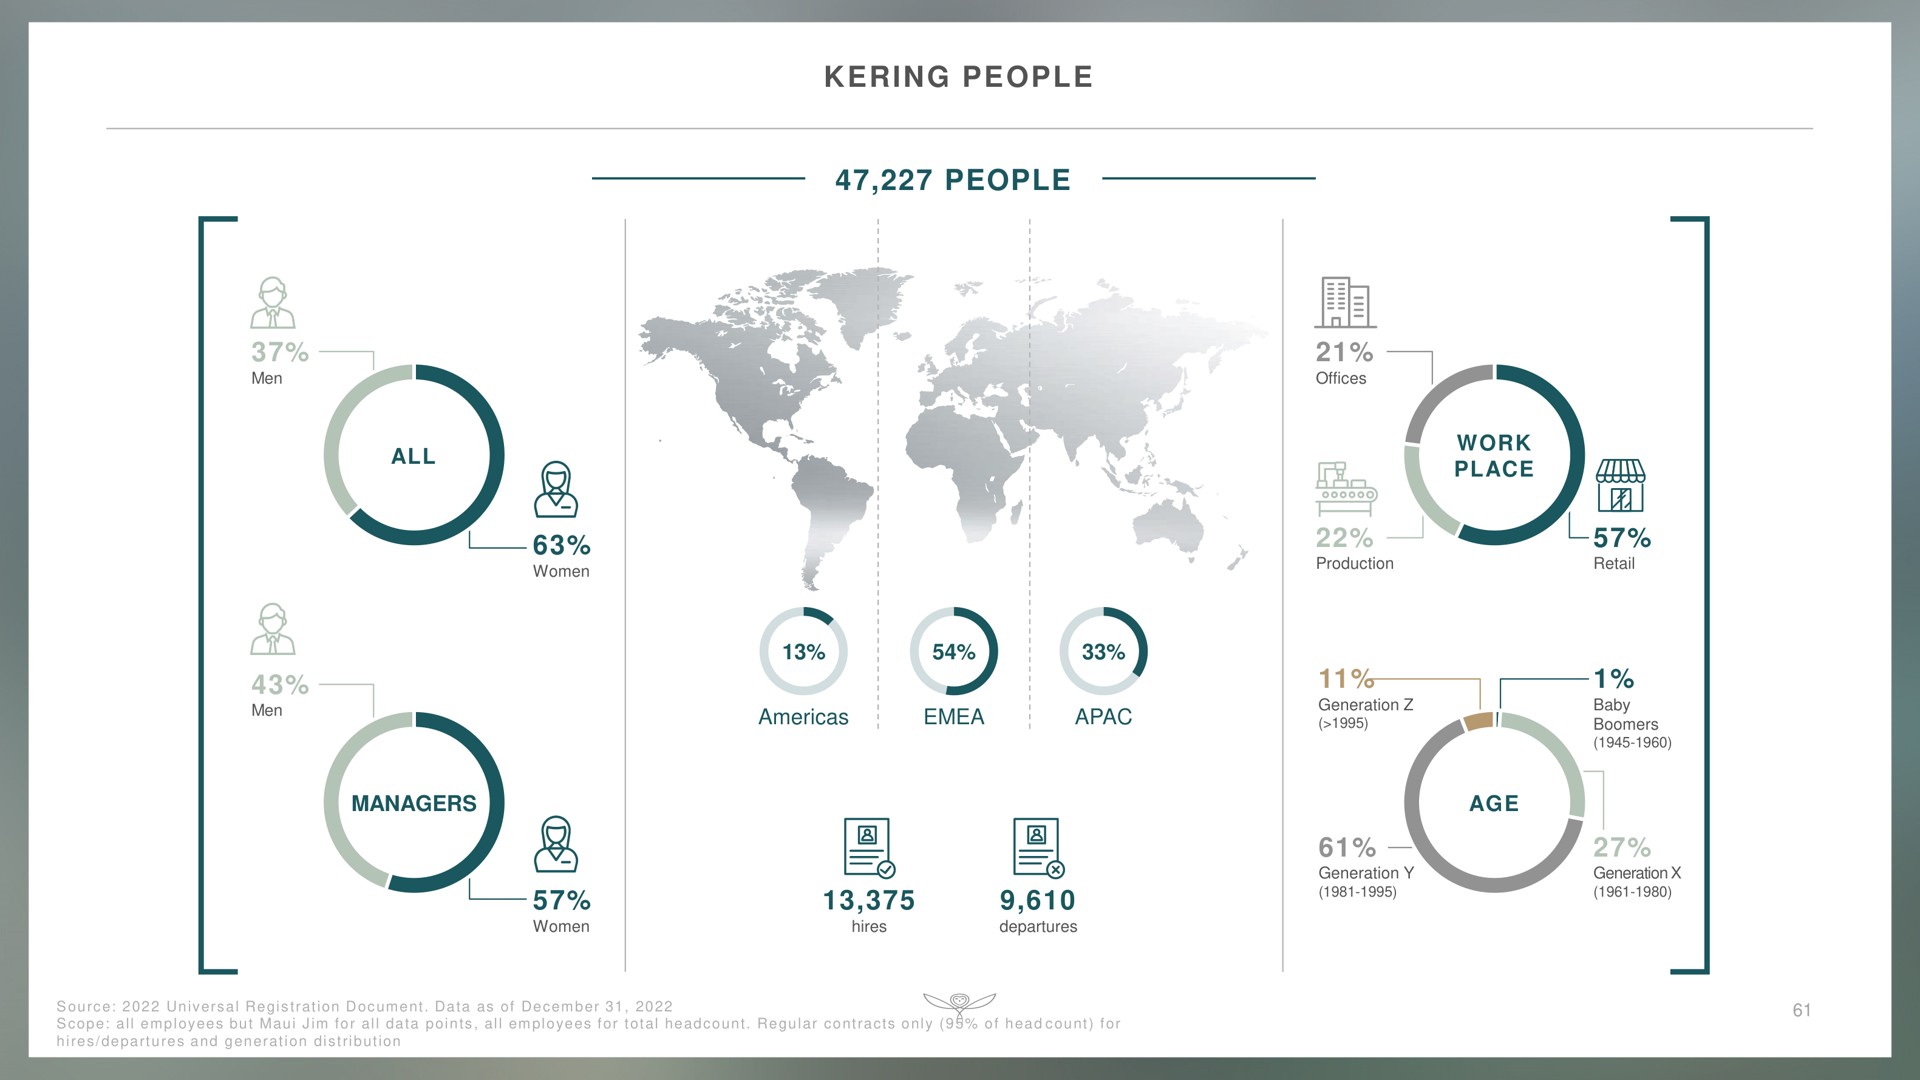 people people place tat a | Kering